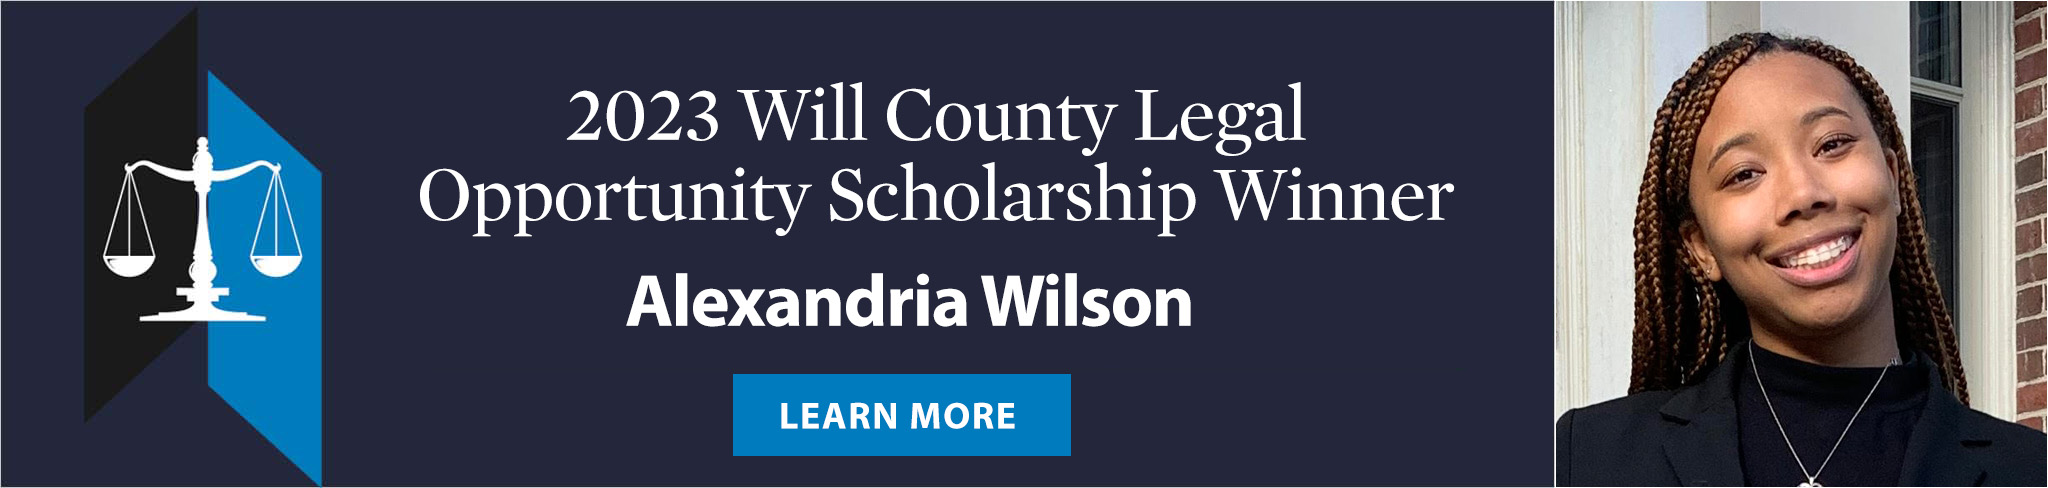 2023 Will County Legal Opportunity Scholarship Recipient - Alexandria Wilson